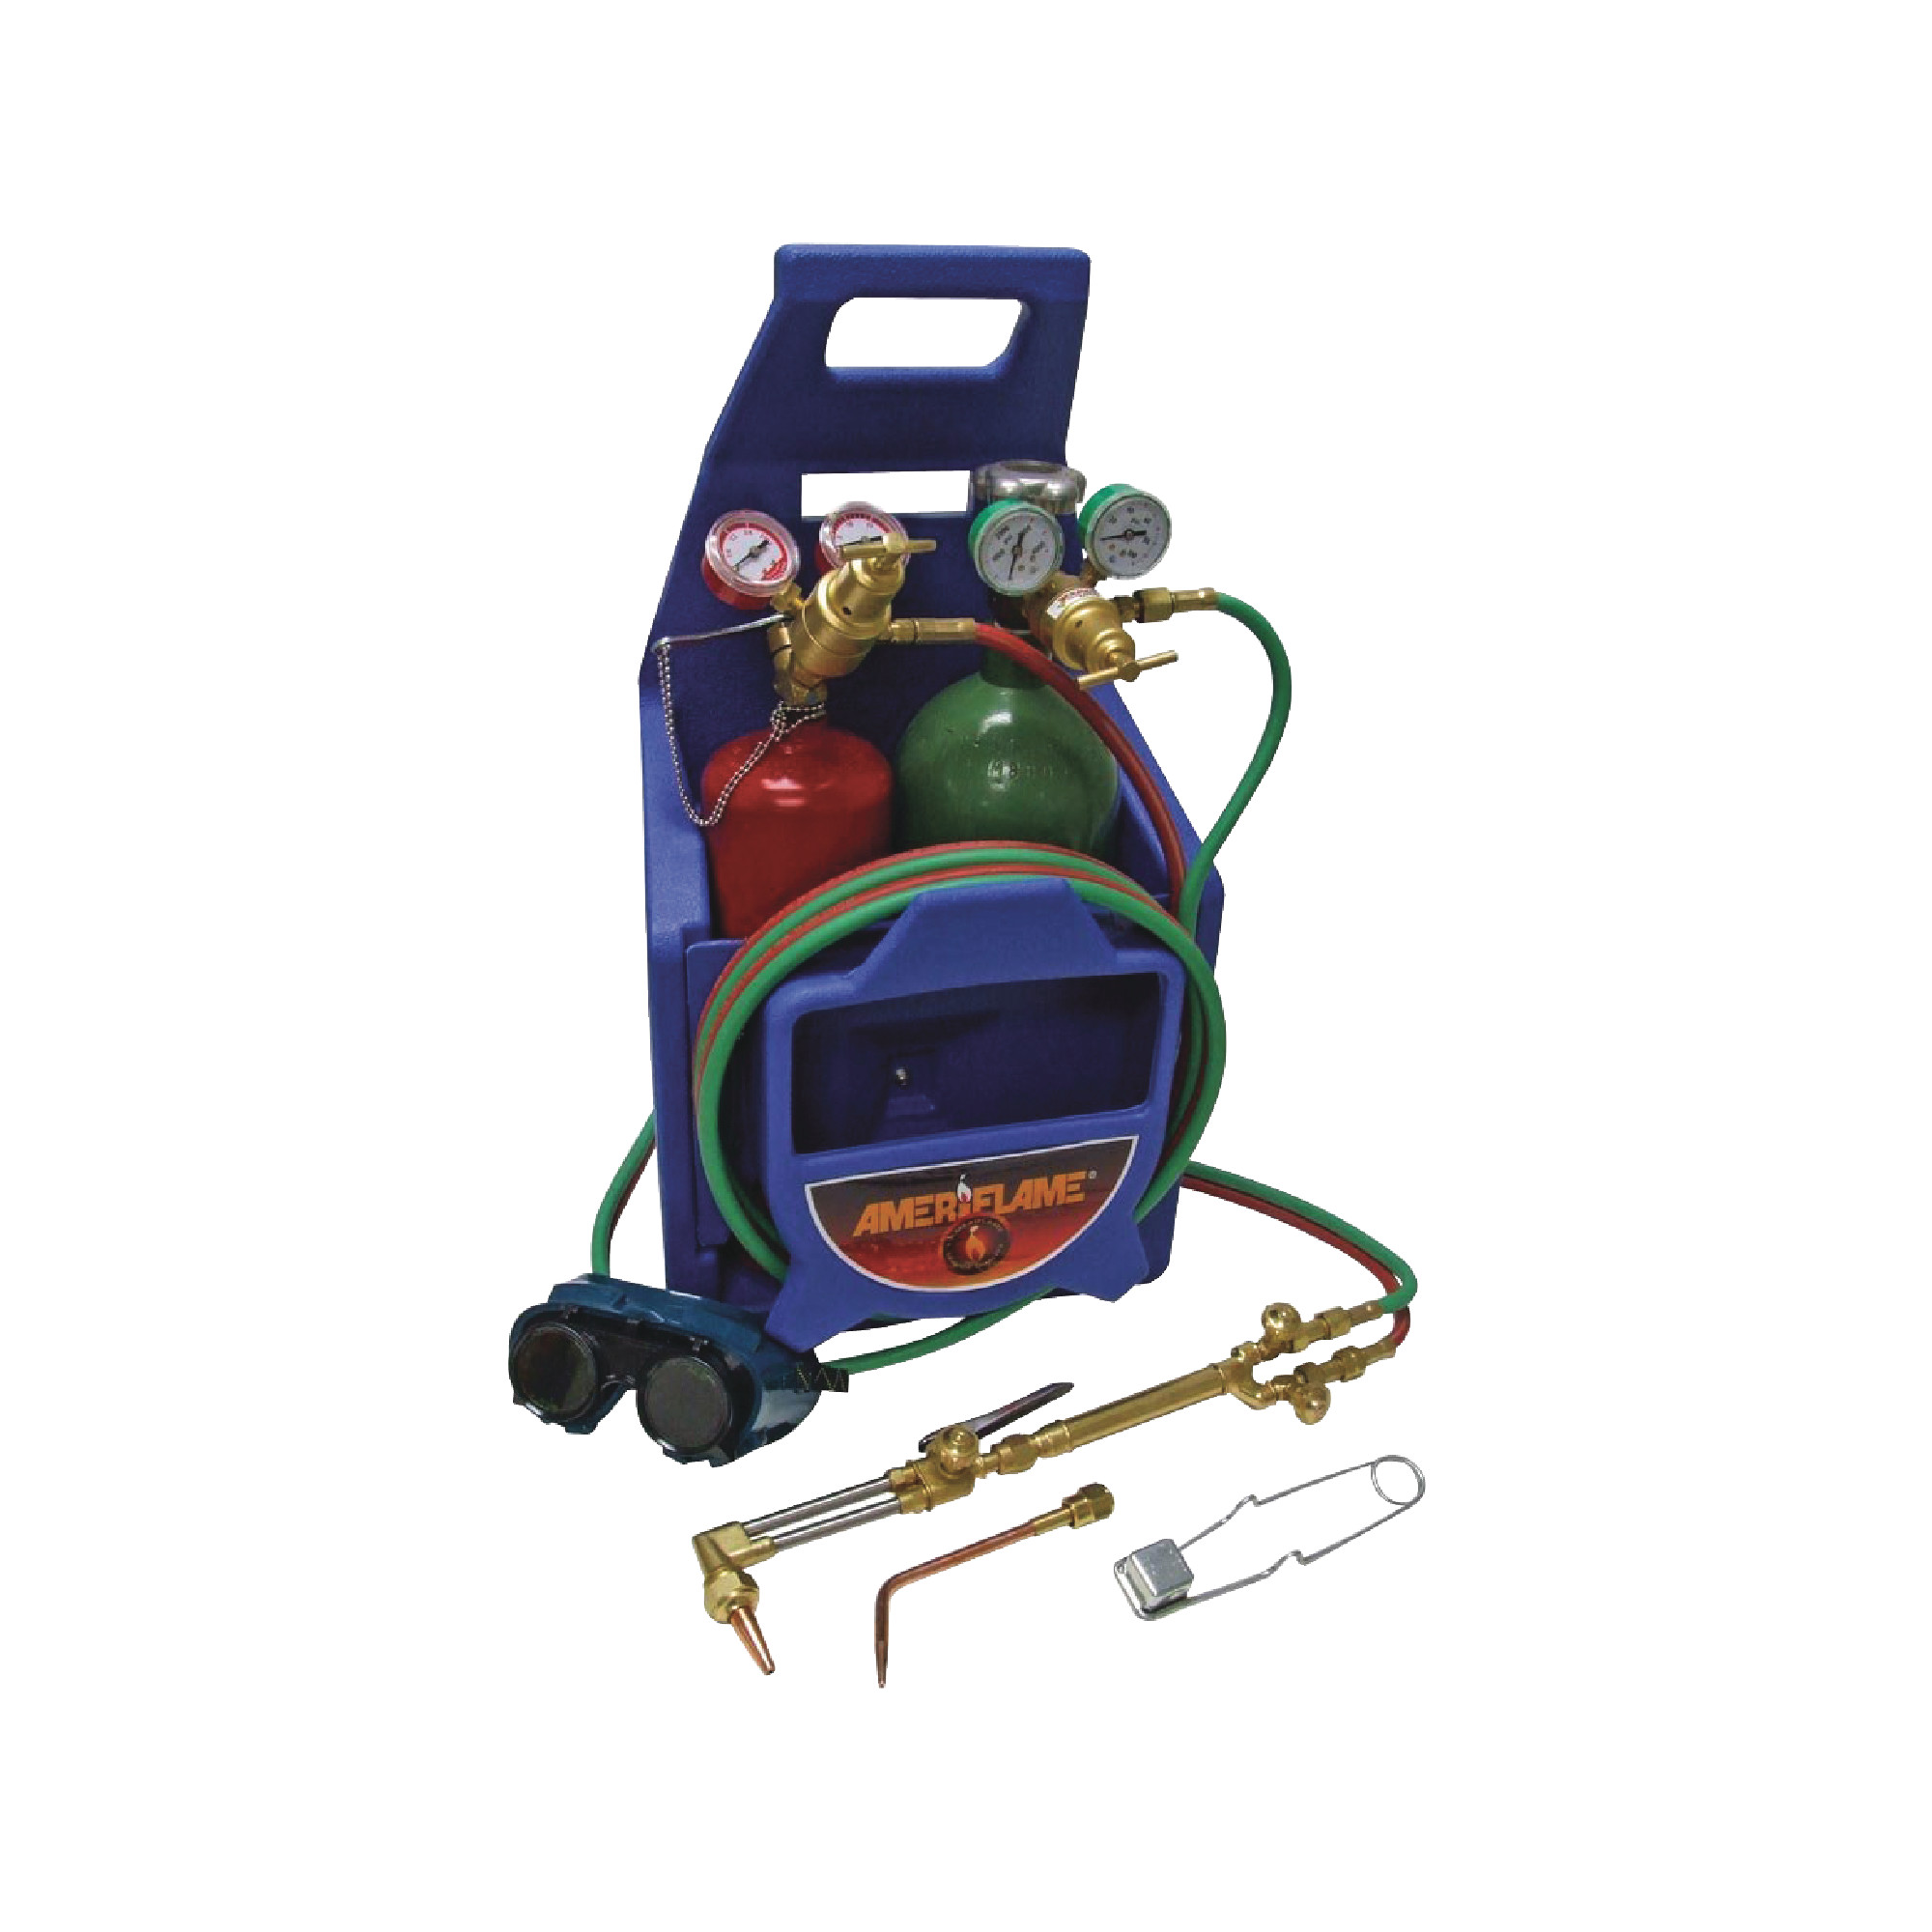 AMERIFLAME Medium/Heavy Duty Portable Welding/Cutting/Brazing Outfit With Plastic Carrying Stand